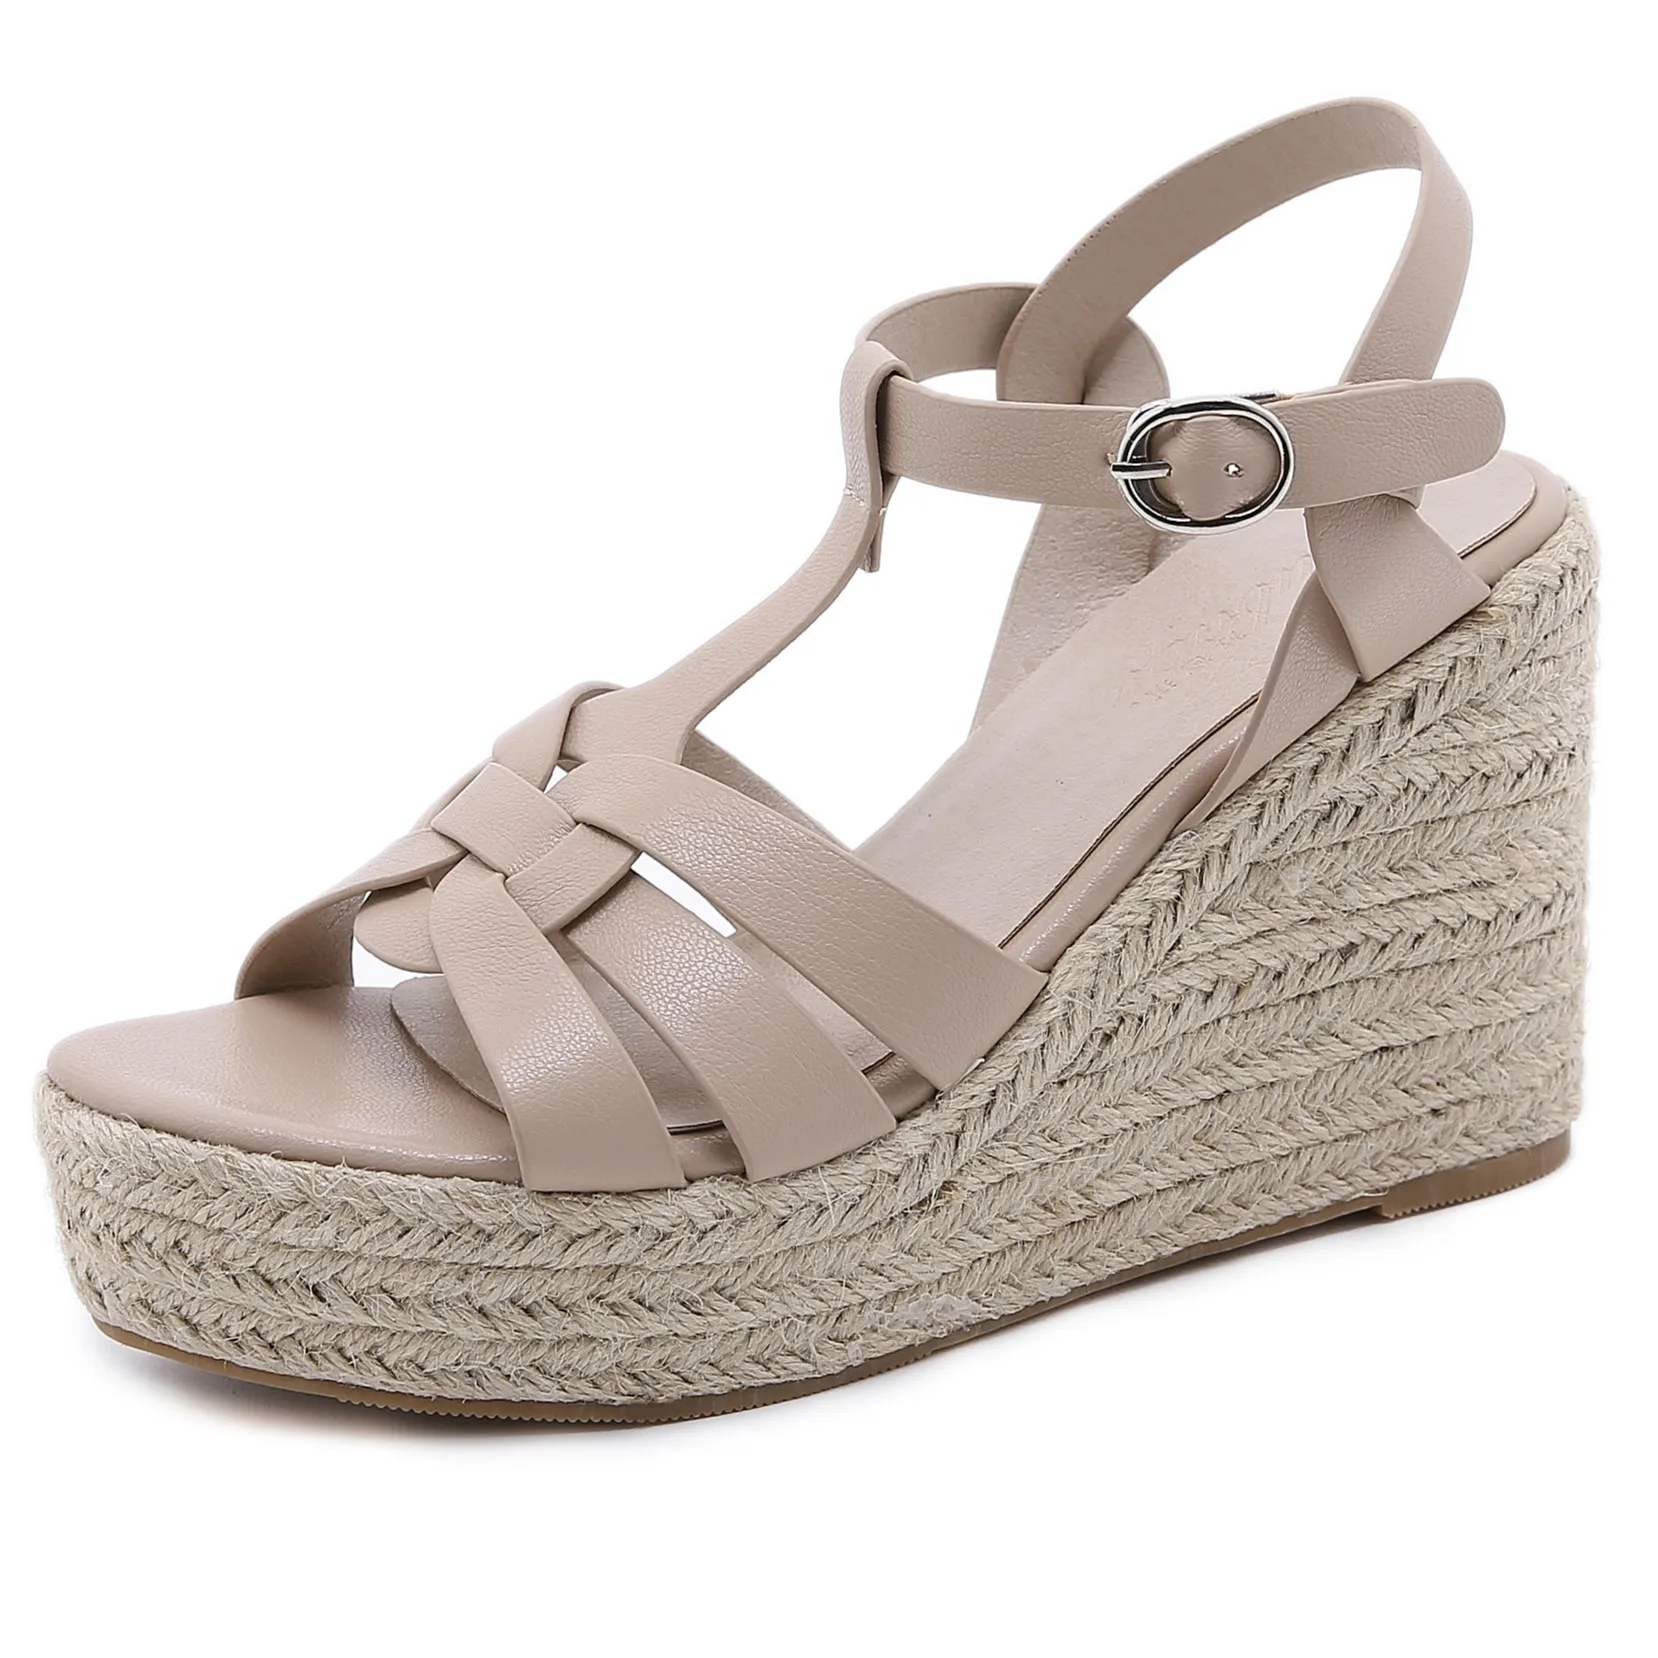 

2022 Summer New Women's Sandals Large Size Platform Shoes Wedge Heels Heightened Thick-soled Roman Women's Shoes